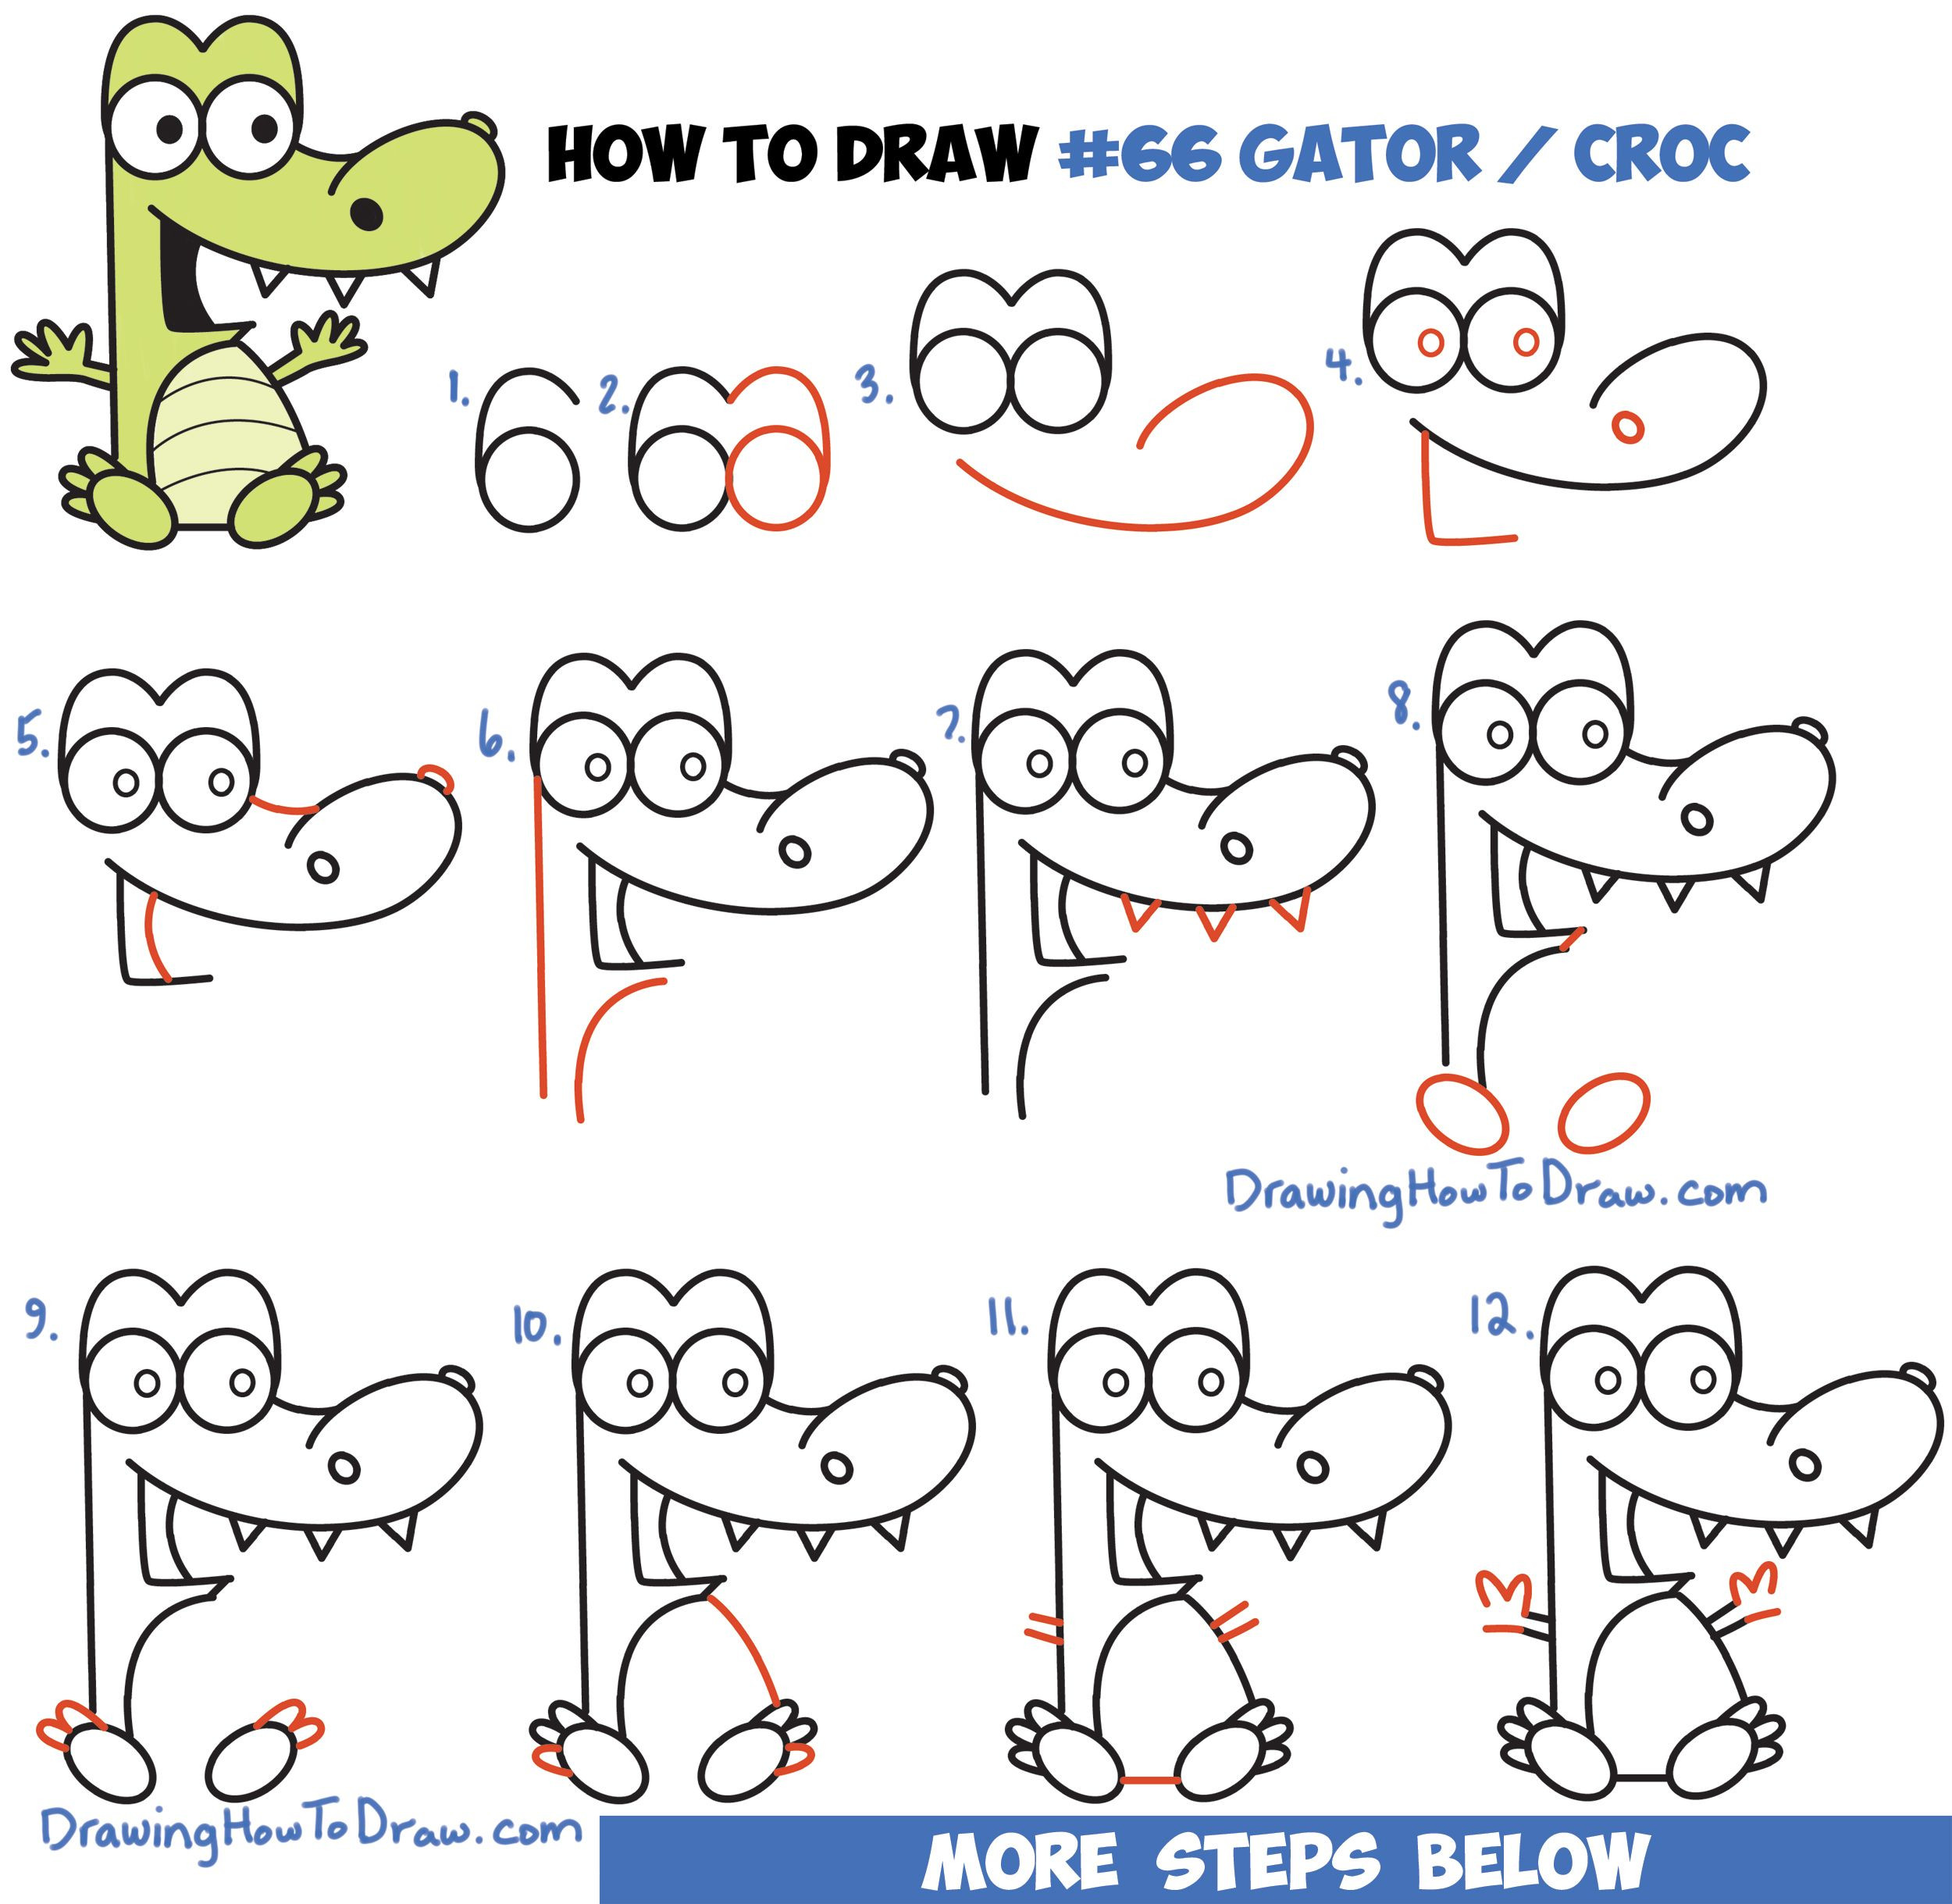 20+ New For Drawing Cartoon Characters Step By Step Easy | The Teddy Theory